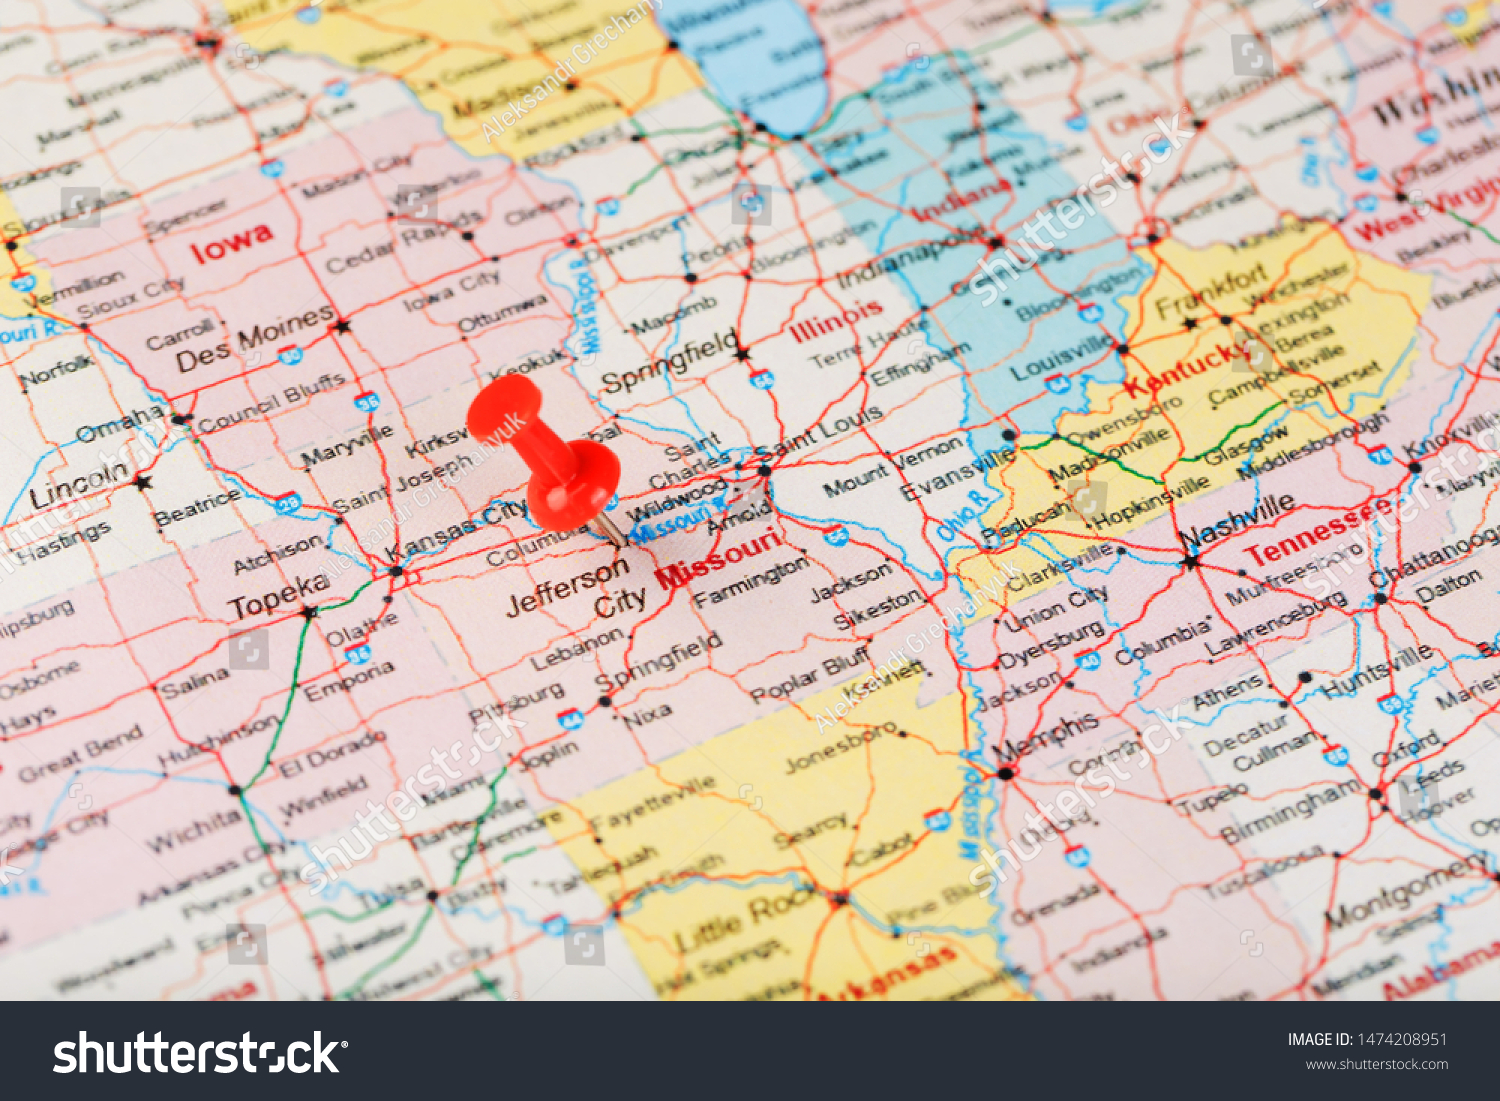 Red Clerical Needle On Map Usa Stock Photo Edit Now 1474208951